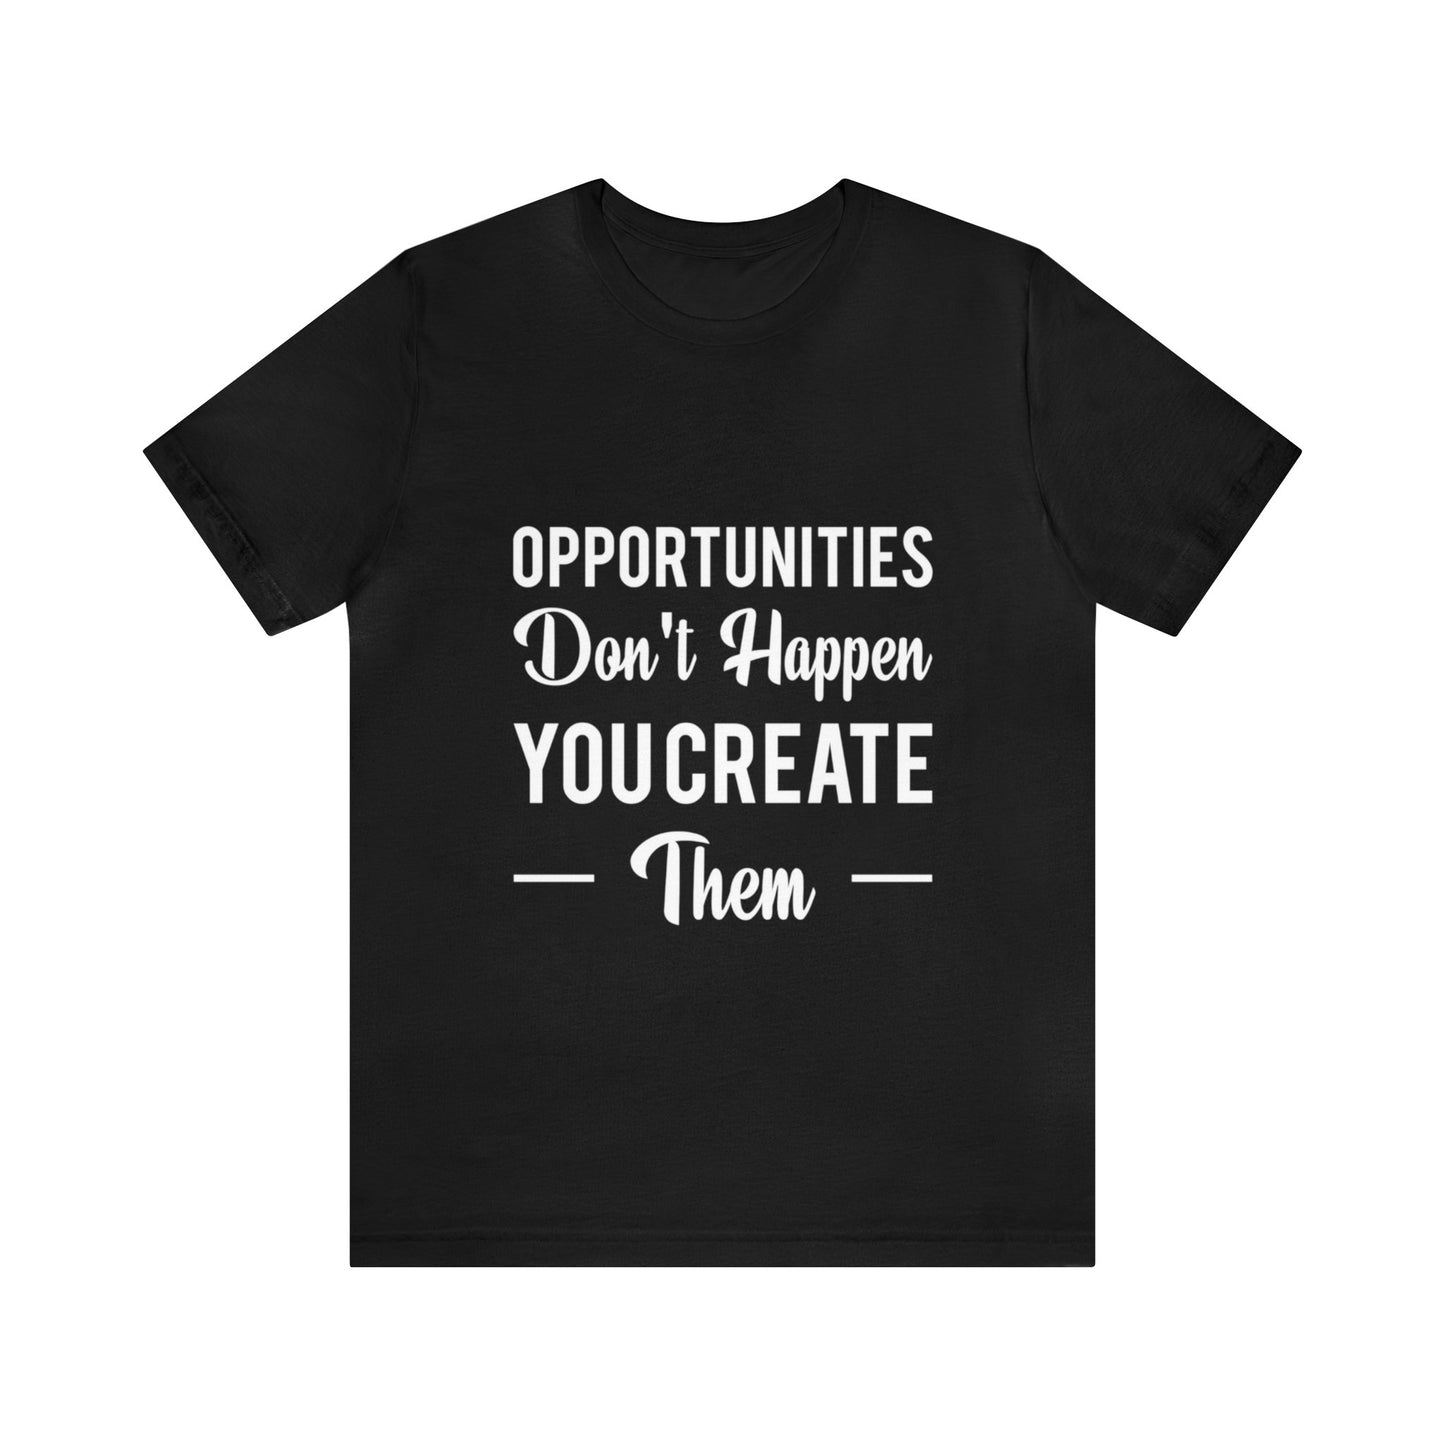 Opportunities Don't Happen, You Create Them - Graphic T Shirt For Men and Women